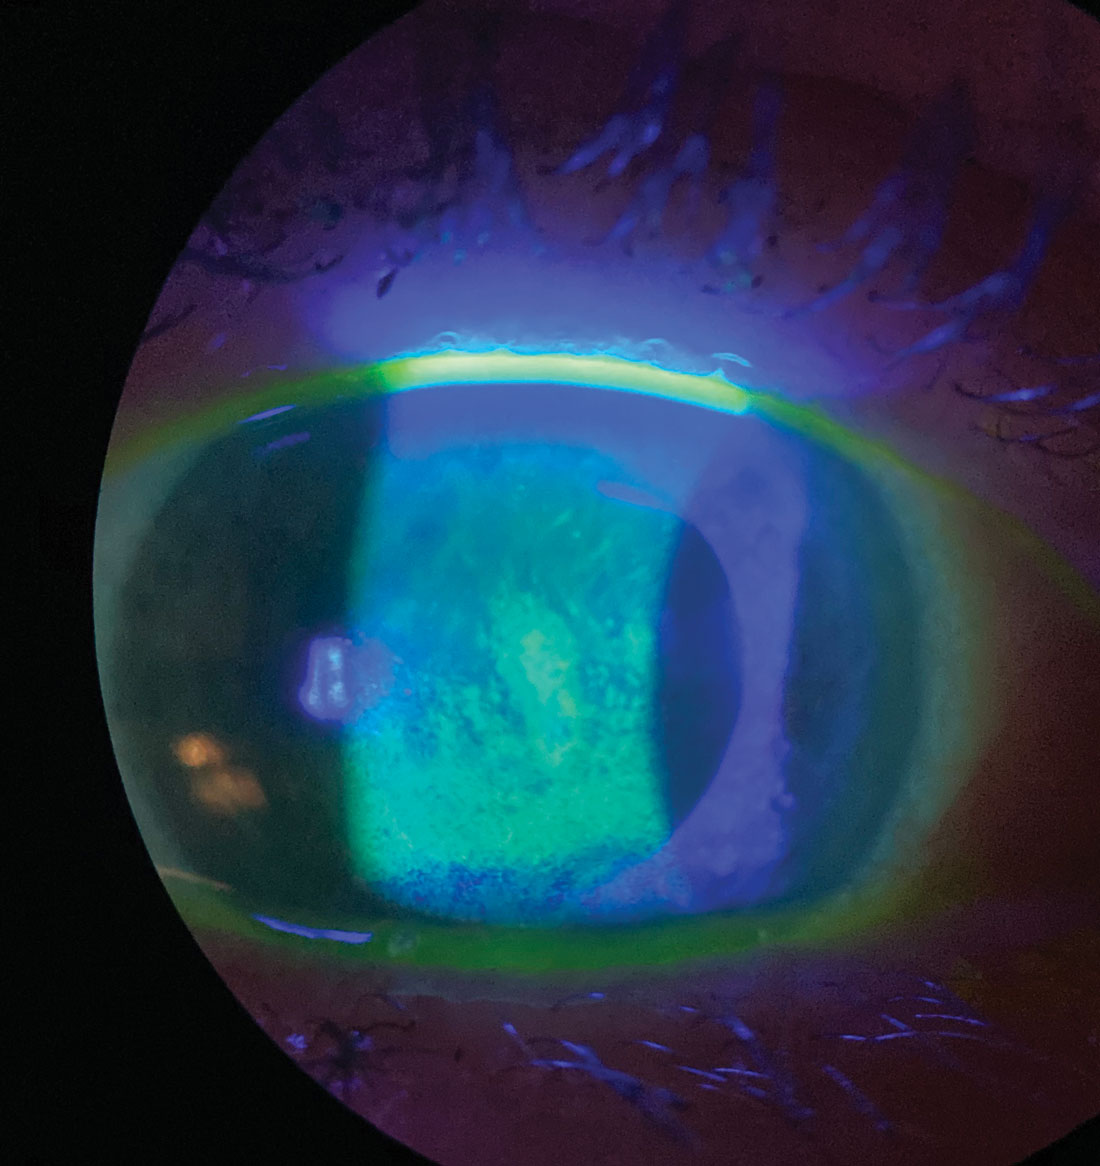 Sodium fluorescein staining shows this patient’s corneal surface is compromised by dry eye disease.